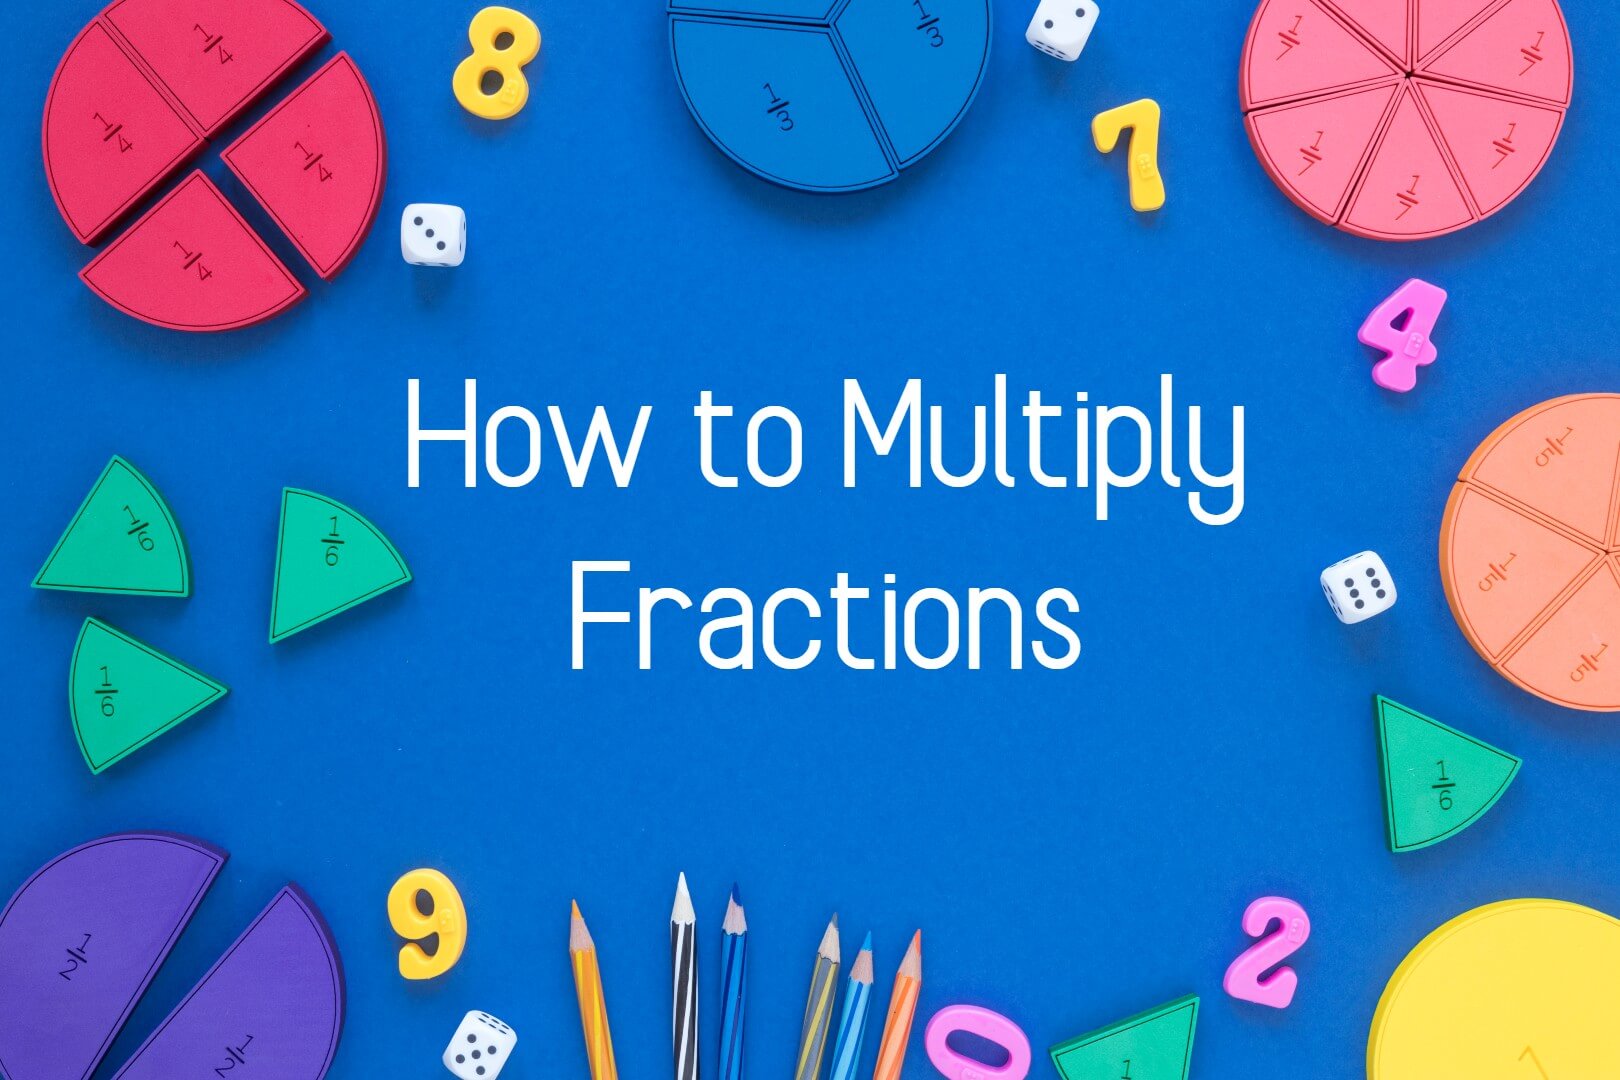 How To Multiply Fractions With Pictures